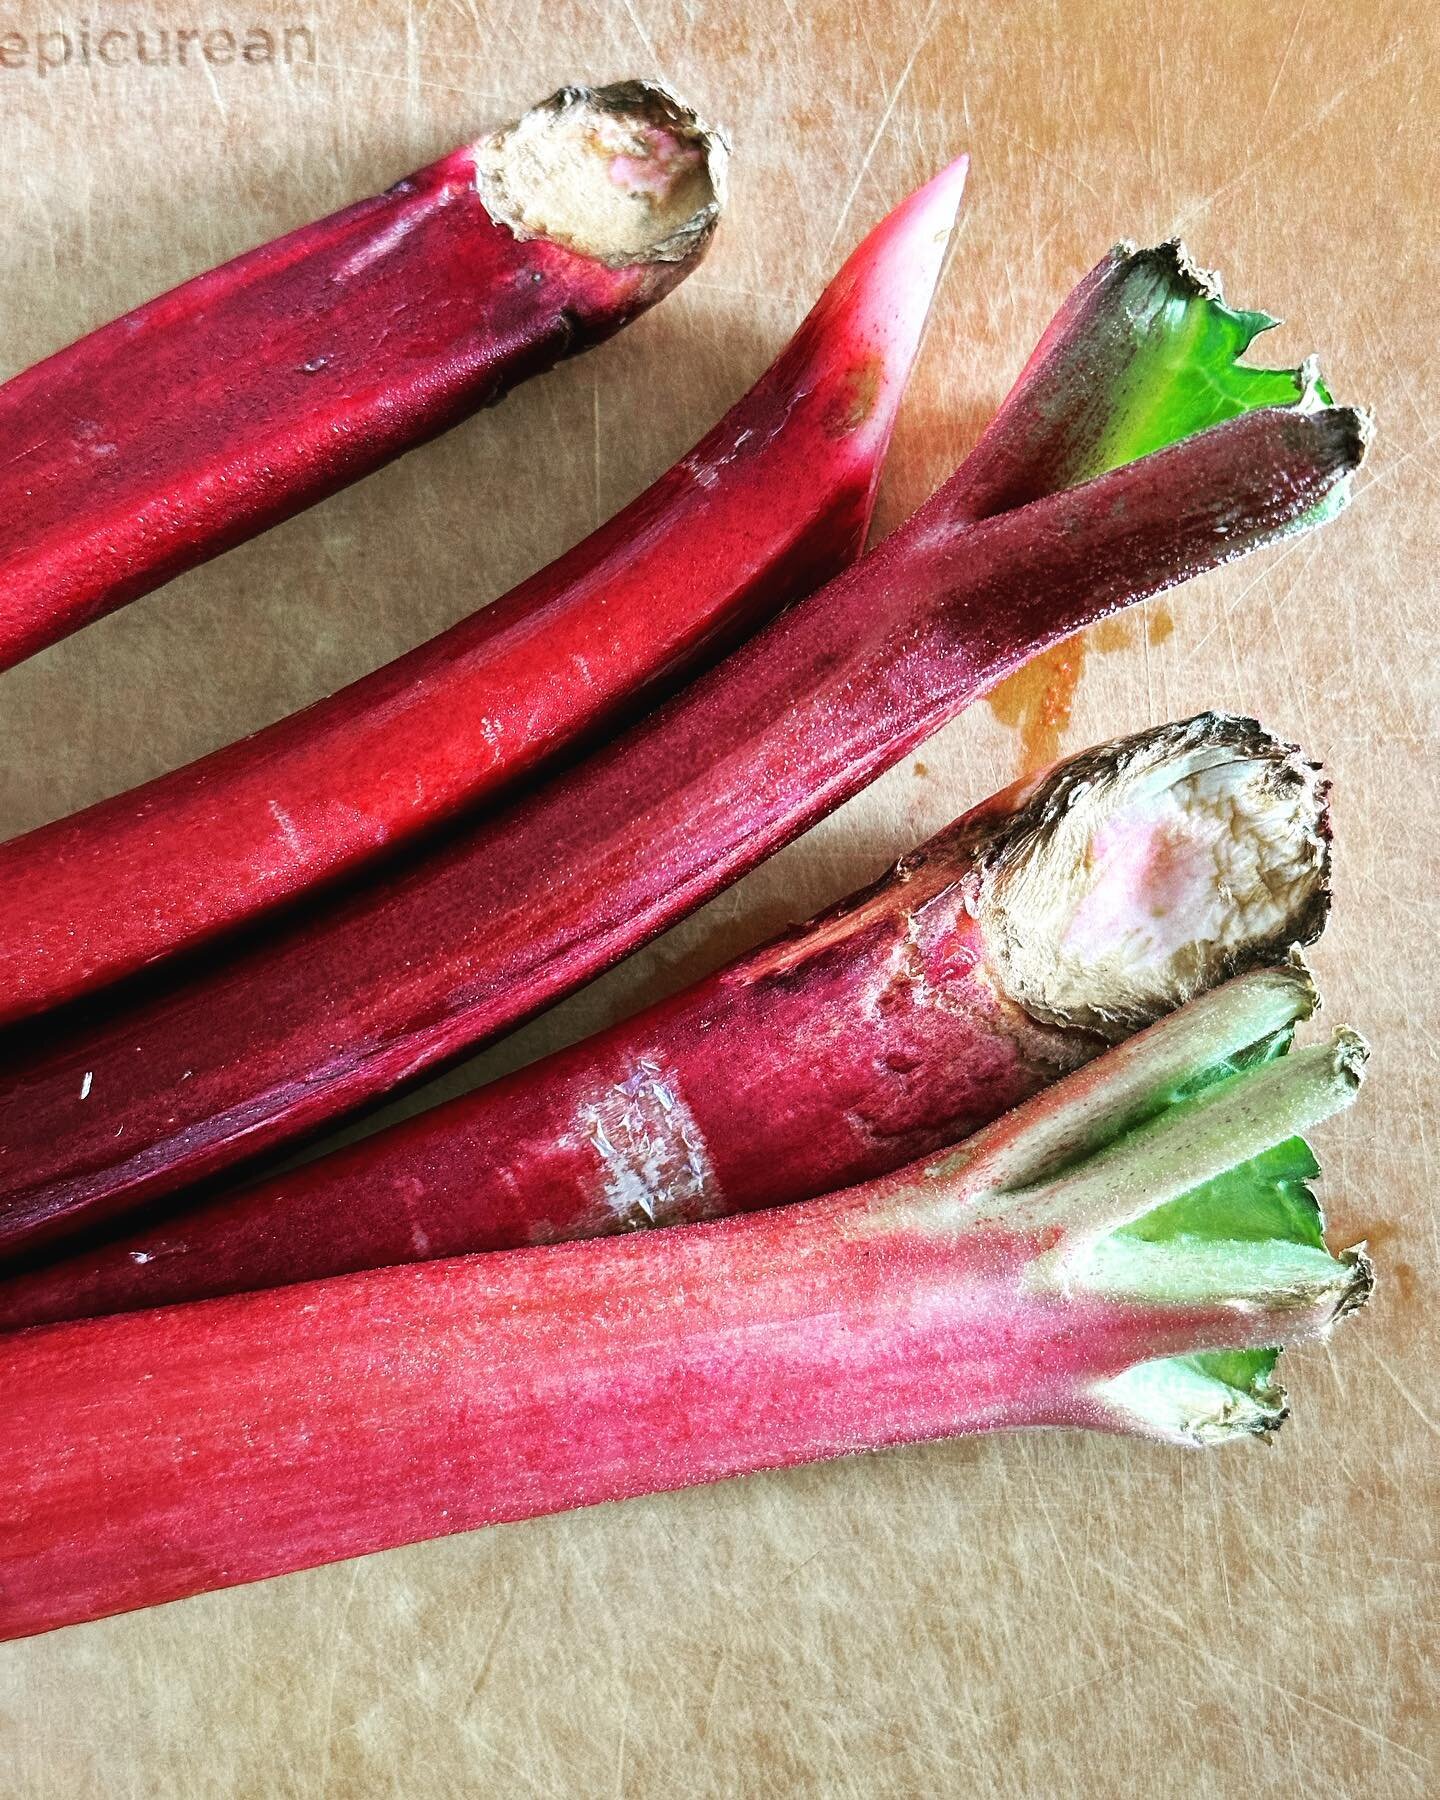 Get some rhubarb before the season is over! Great in pastries and desserts with a slightly sour flavor it&rsquo;s also high in antioxidants which means it&rsquo;s helps the body fight free radicals giving you healthy skin and repairing cells in the b